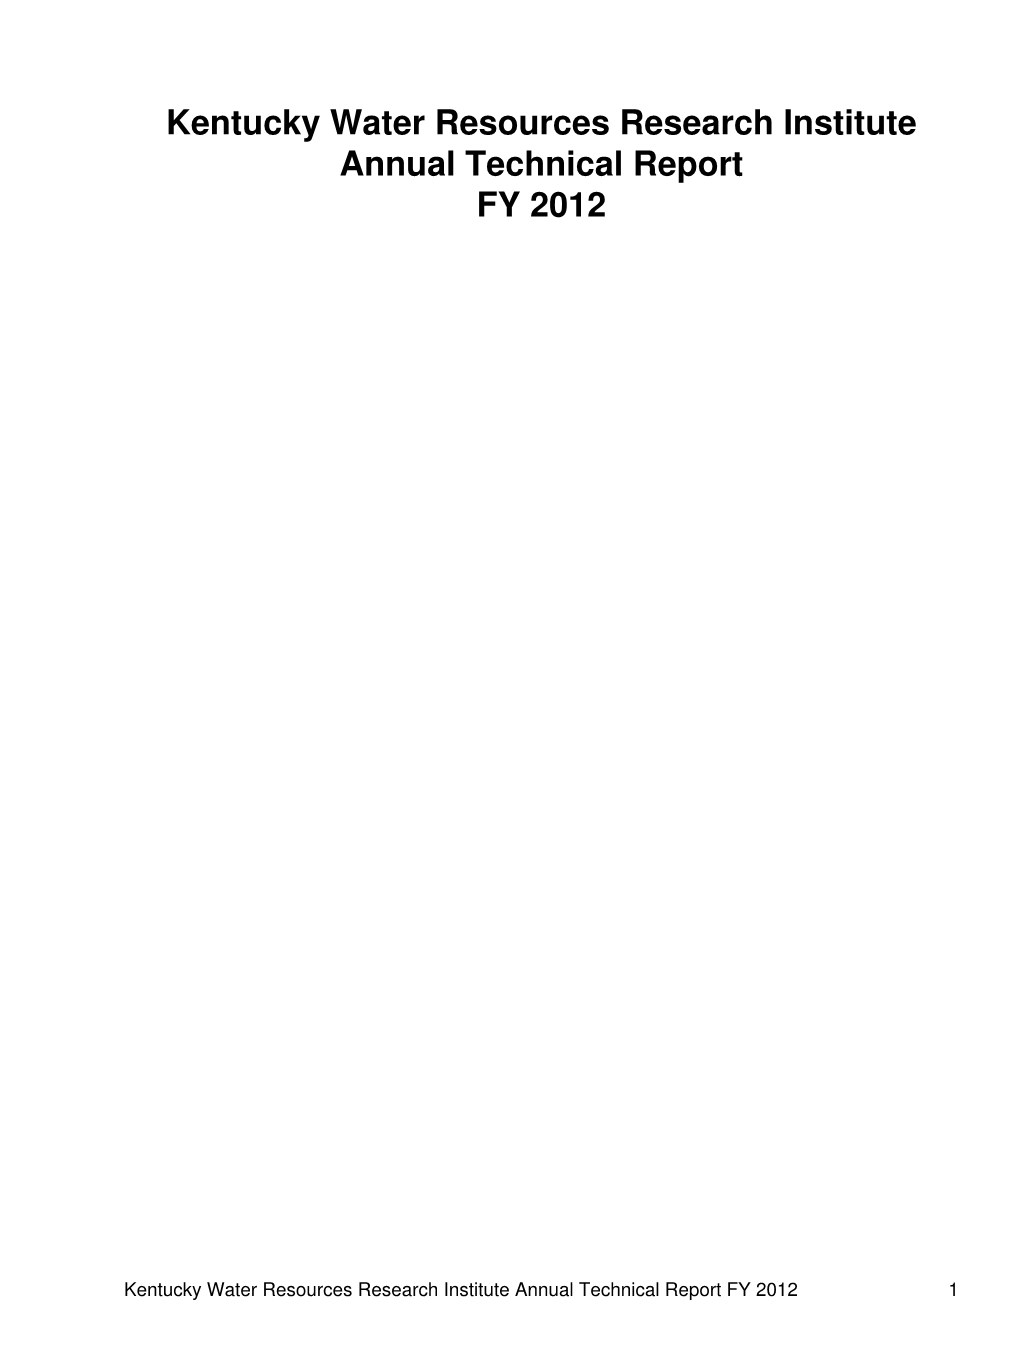 Kentucky Water Resources Research Institute Annual Technical Report FY 2012